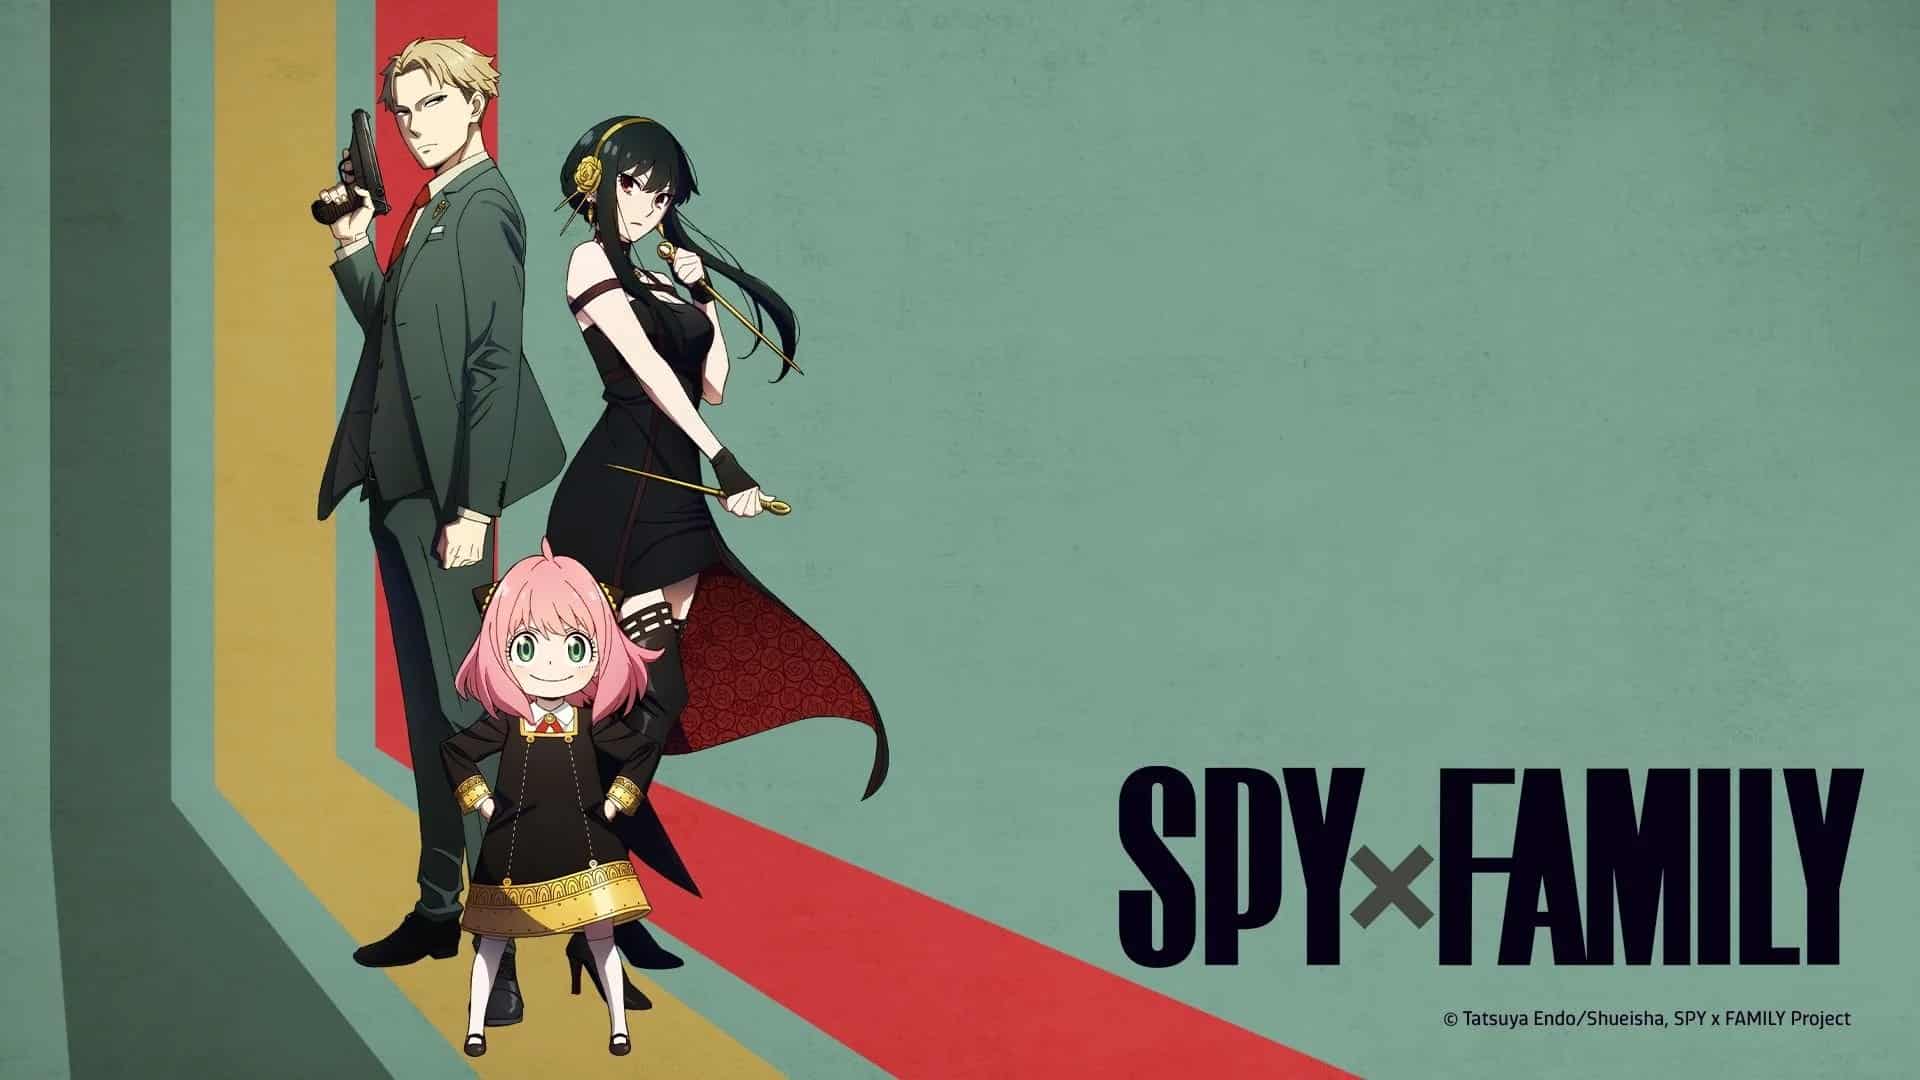 Spy x Family will return in 2023 with the 2nd Season and a movie GamersRD